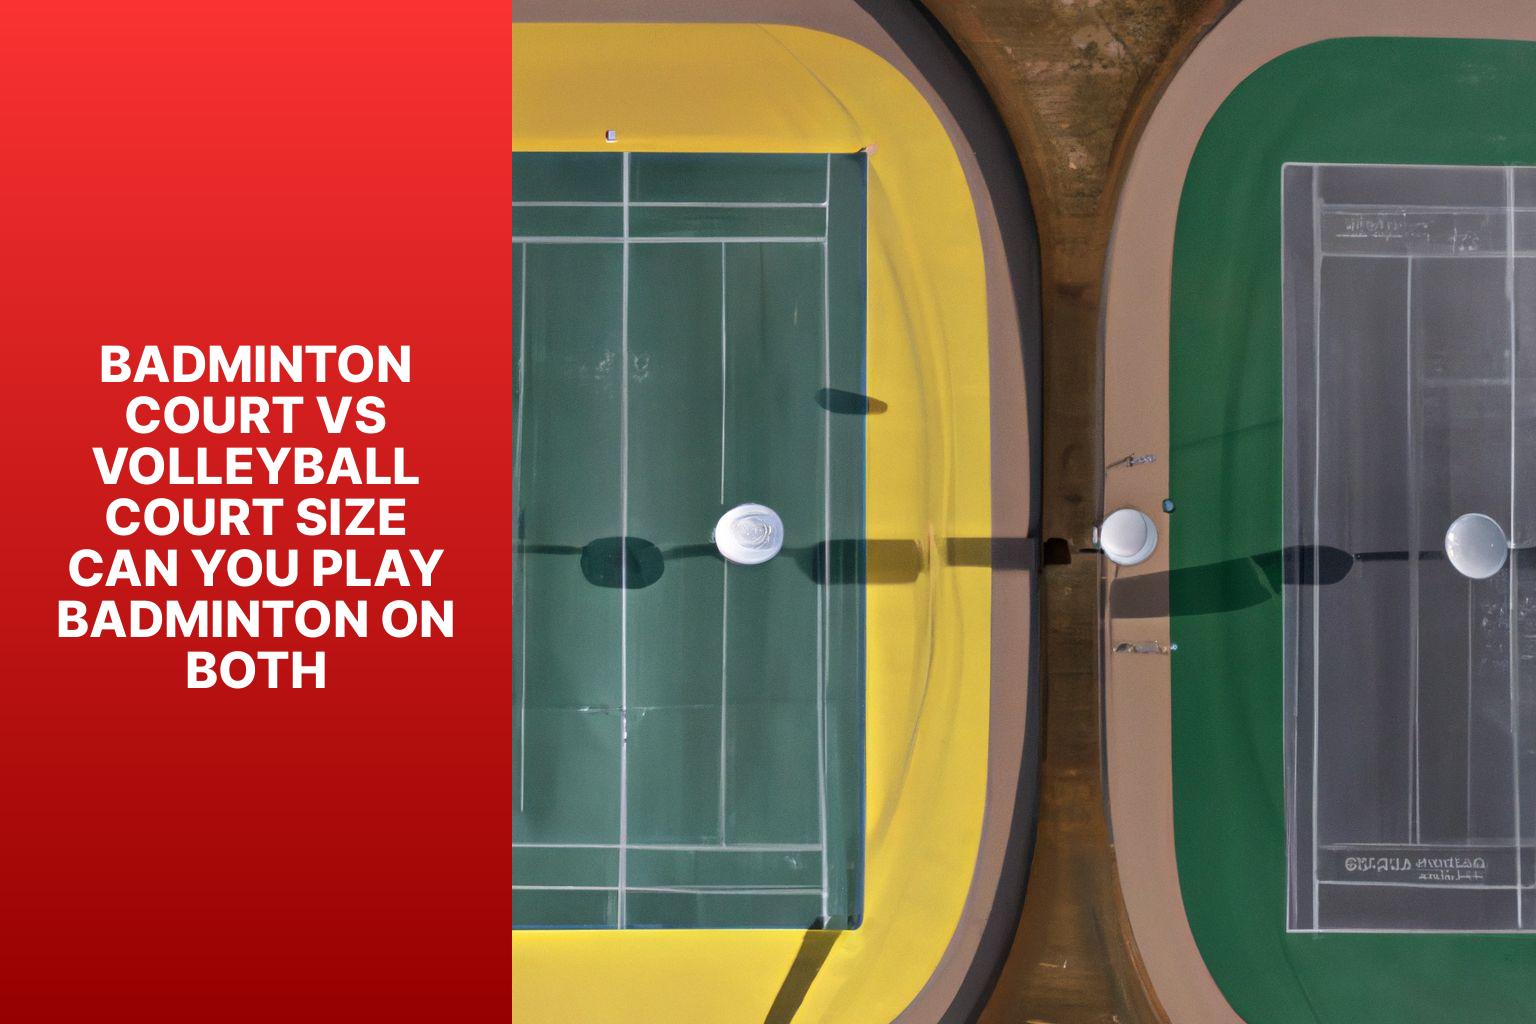 Badminton court vs volleyball court size can you play badminton on both